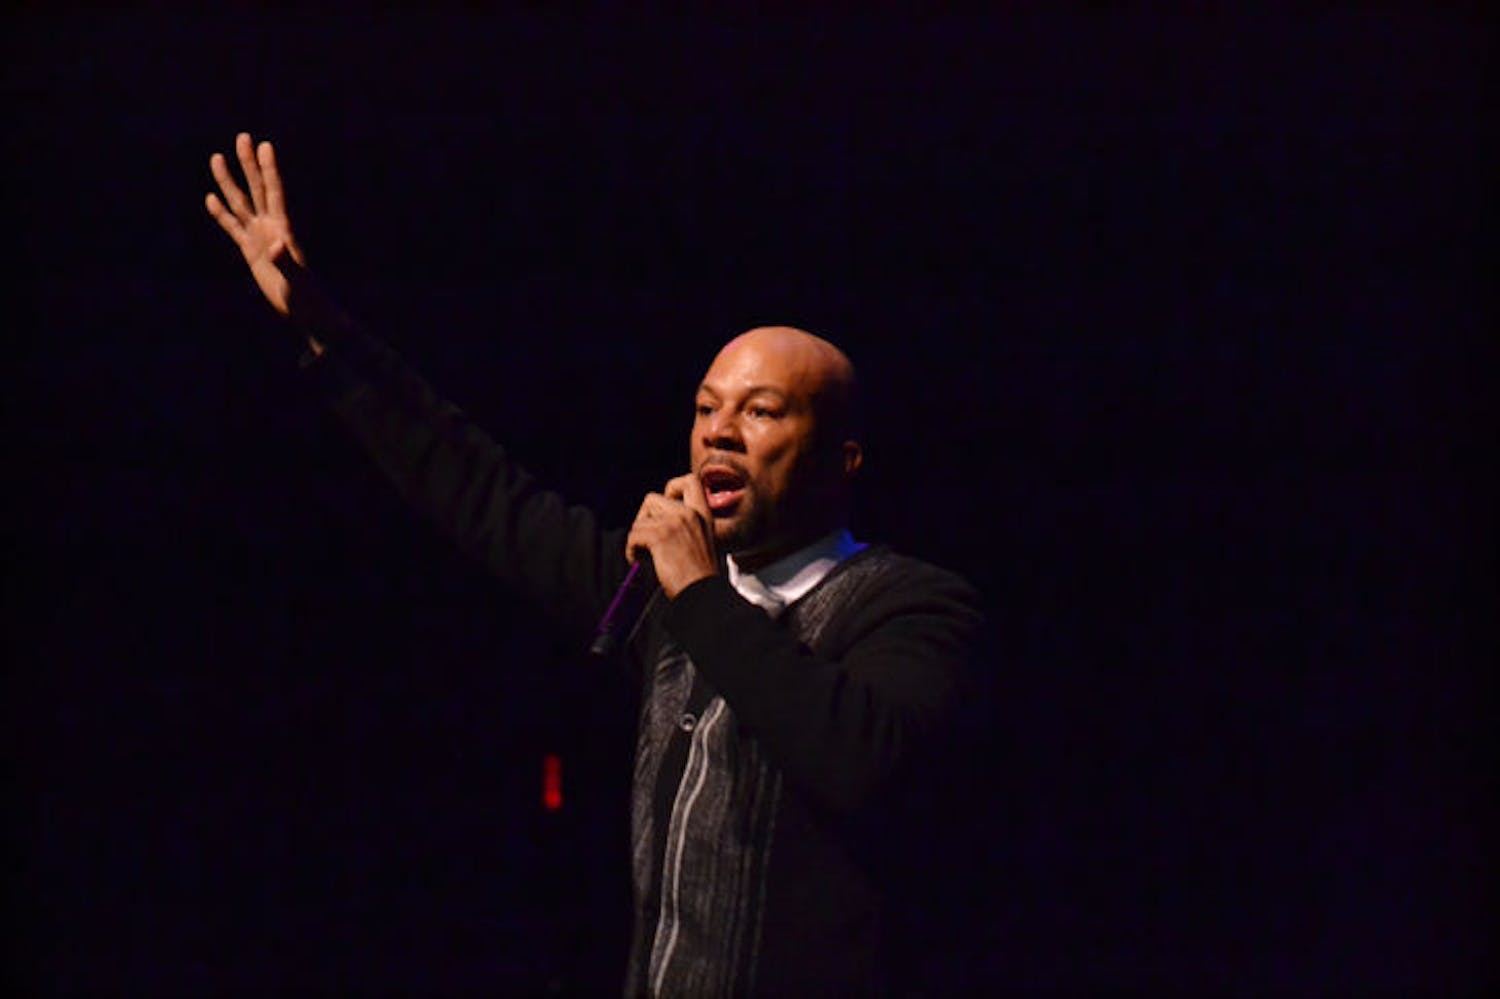 Rapper, actor and writer Common spoke and performed for UF students Thursday evening at the Curtis M. Phillips Center for the Performing Arts. The event was put on by Accent Speaker’s Bureau and co-sponsored by Black History Month.